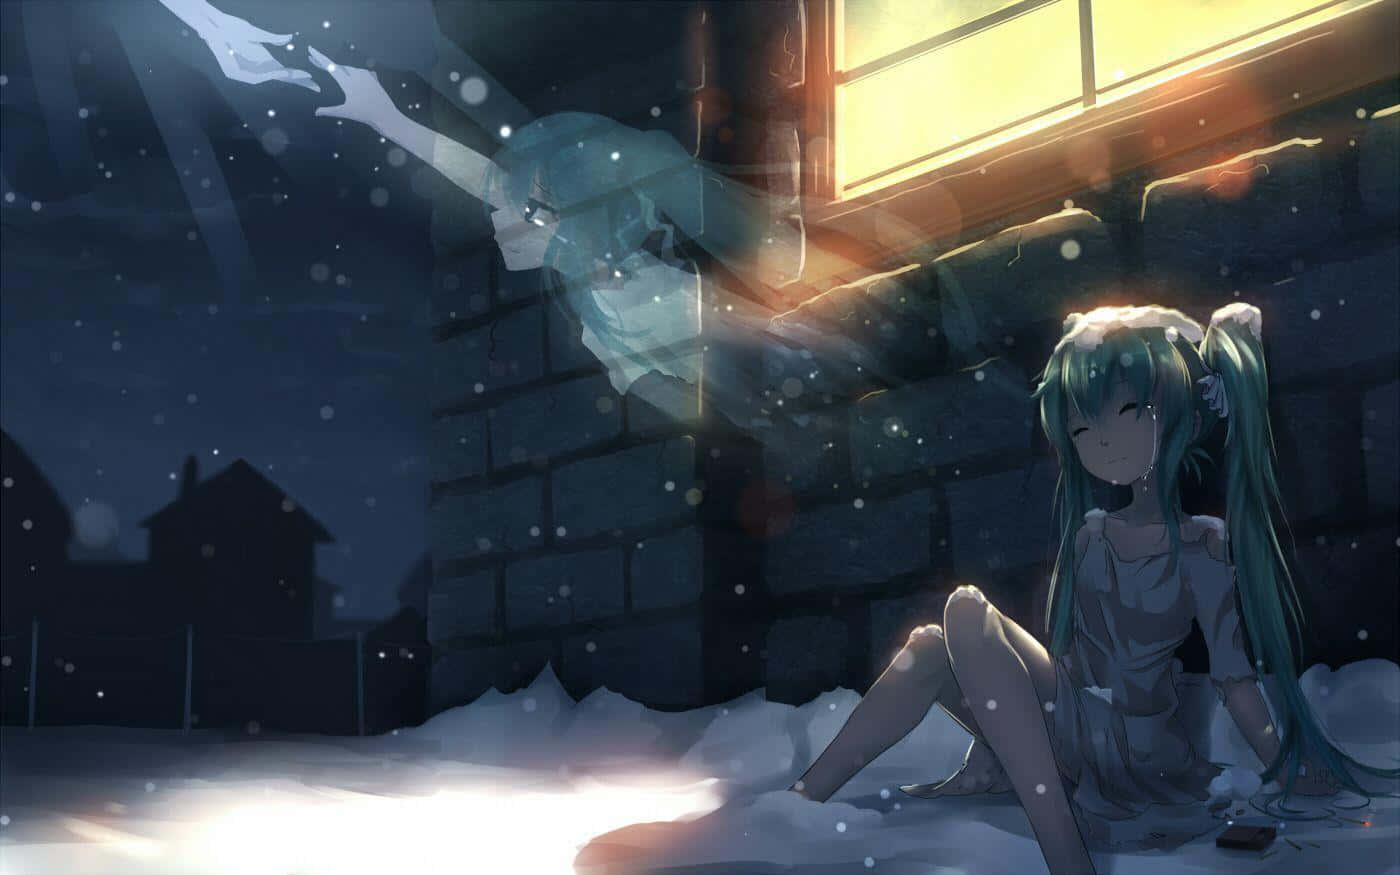 A still from the incredibly popular anime depicting difficult emotions of depression. Wallpaper